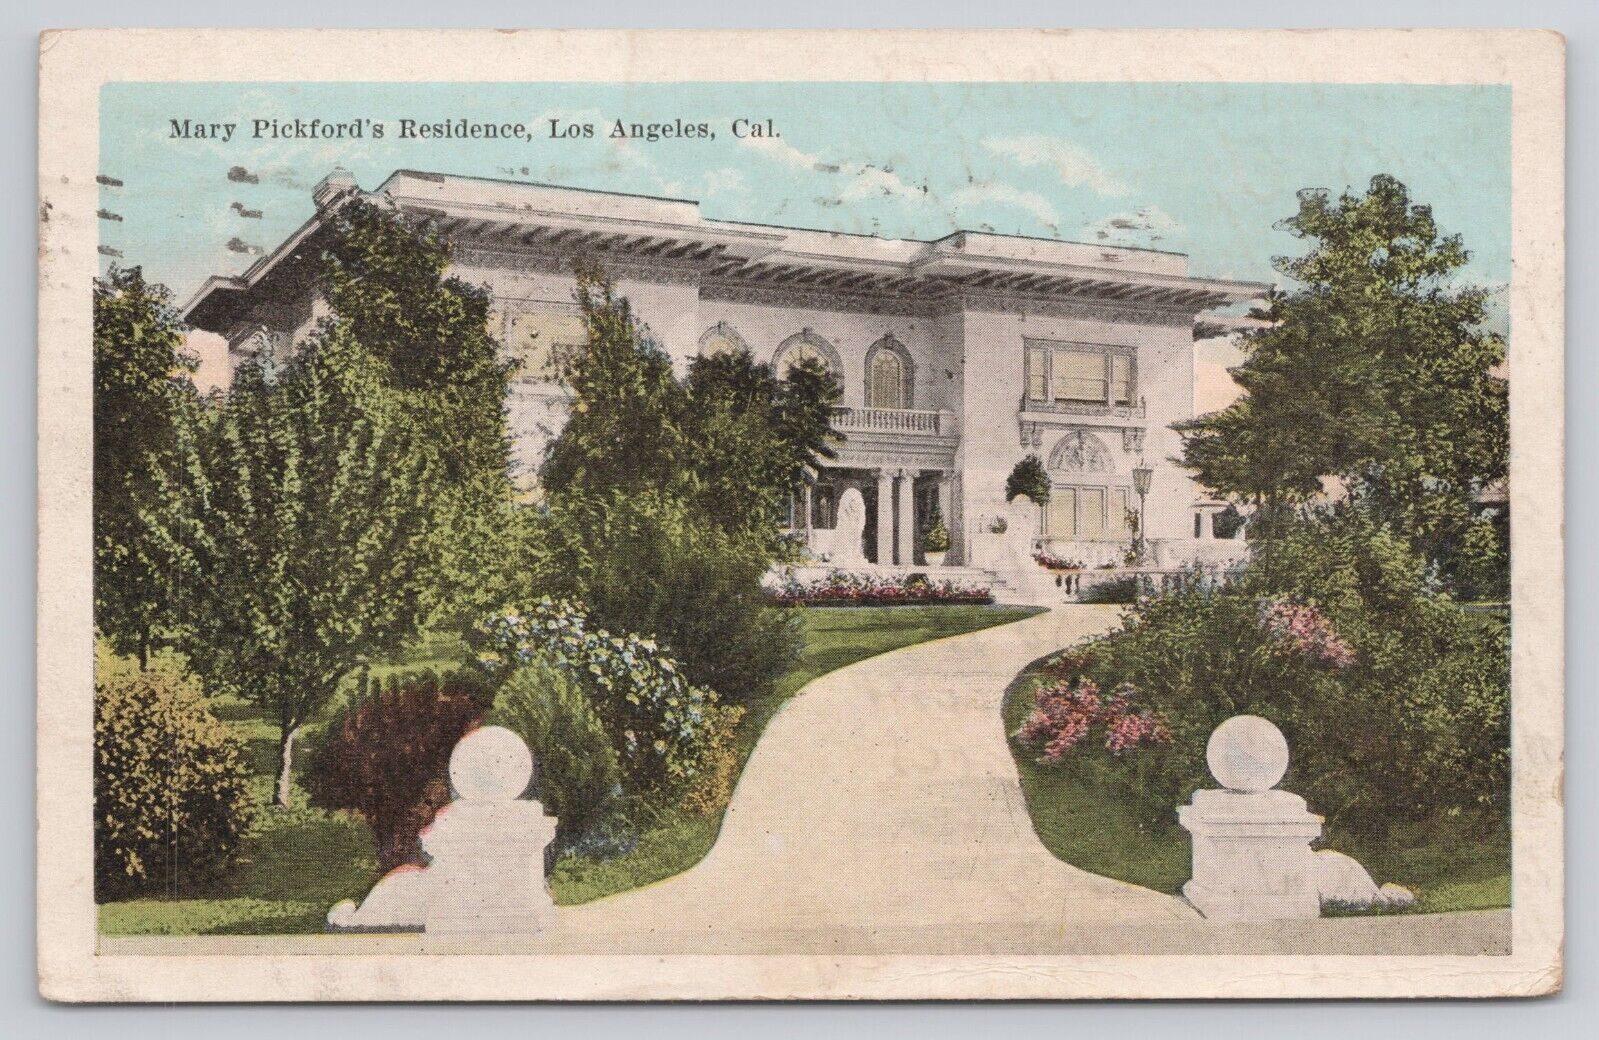 Mary Pickfords Residence Los Angeles California Postmarked 1921 Antique Postcard